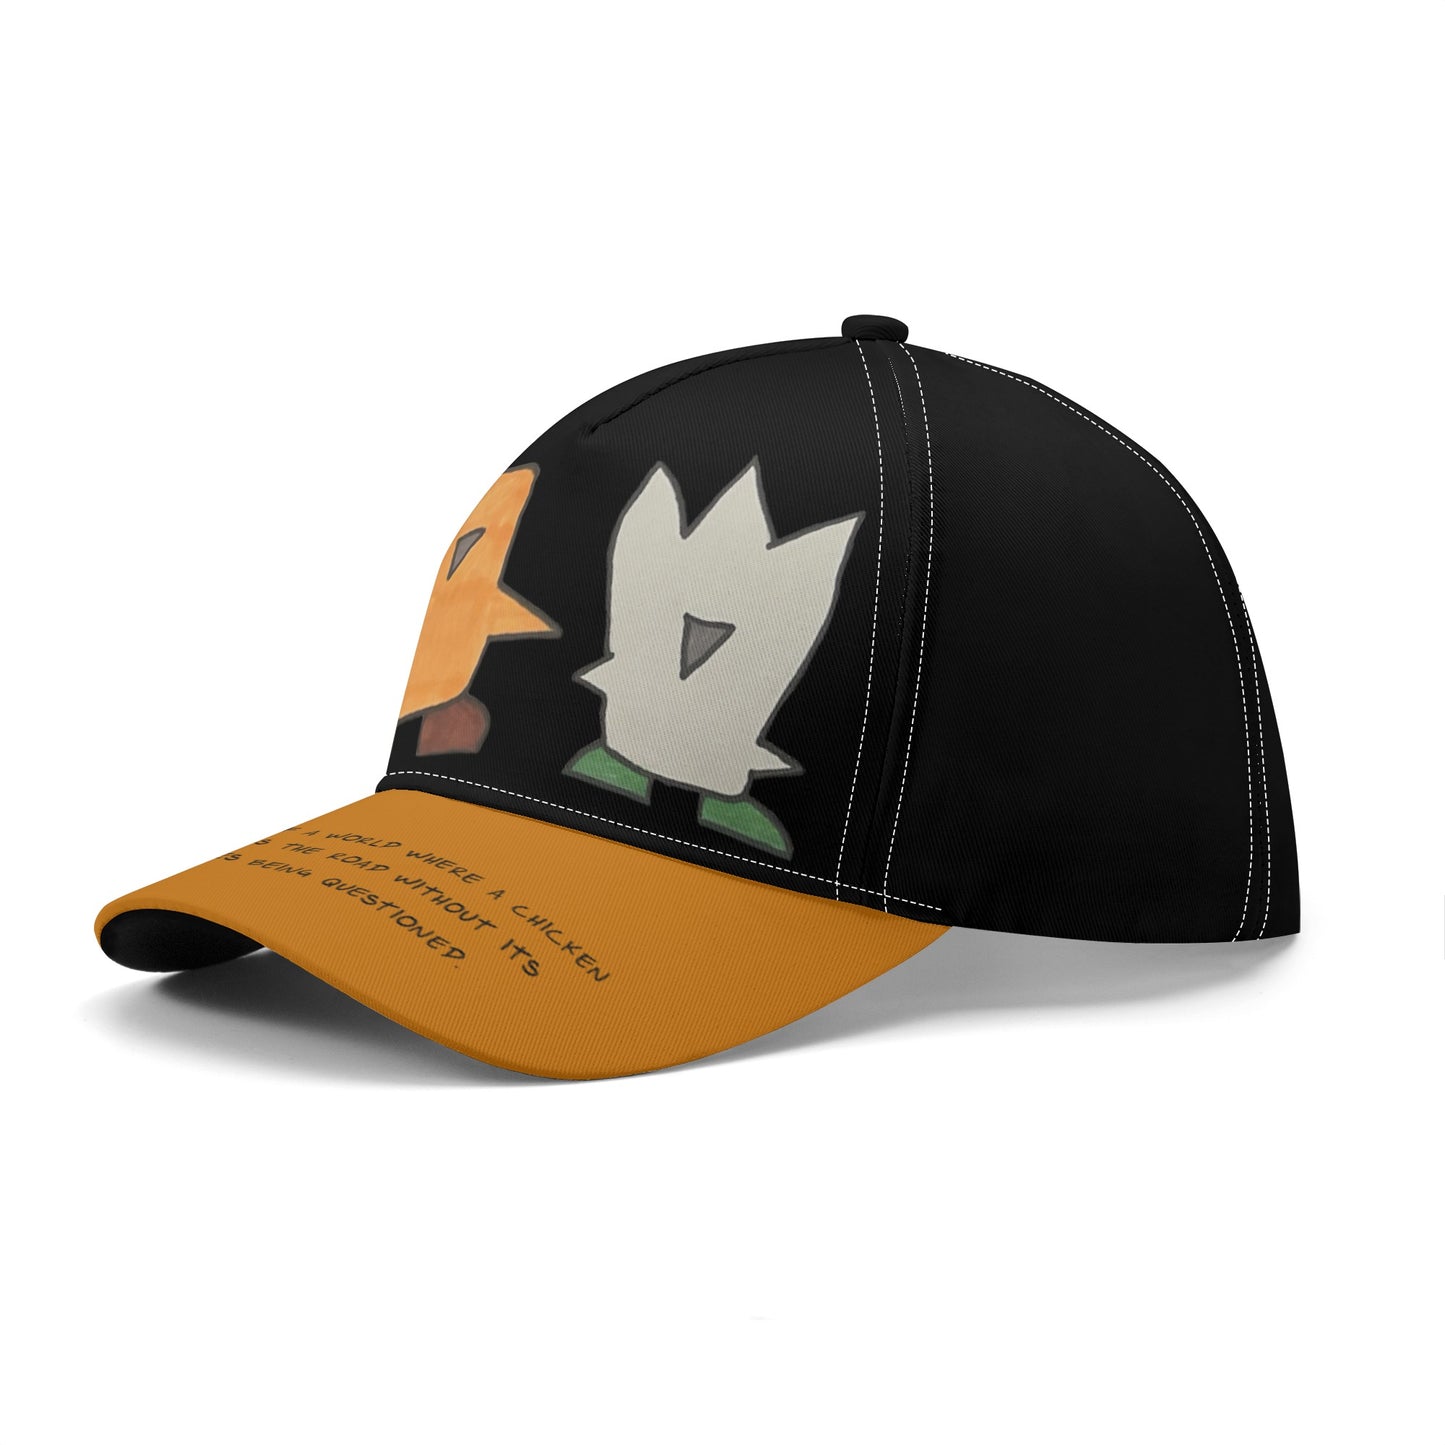 'I dream of a world' Baseball Cap in Black/Tan with Fuzzy and Muffin artwork by D.B.